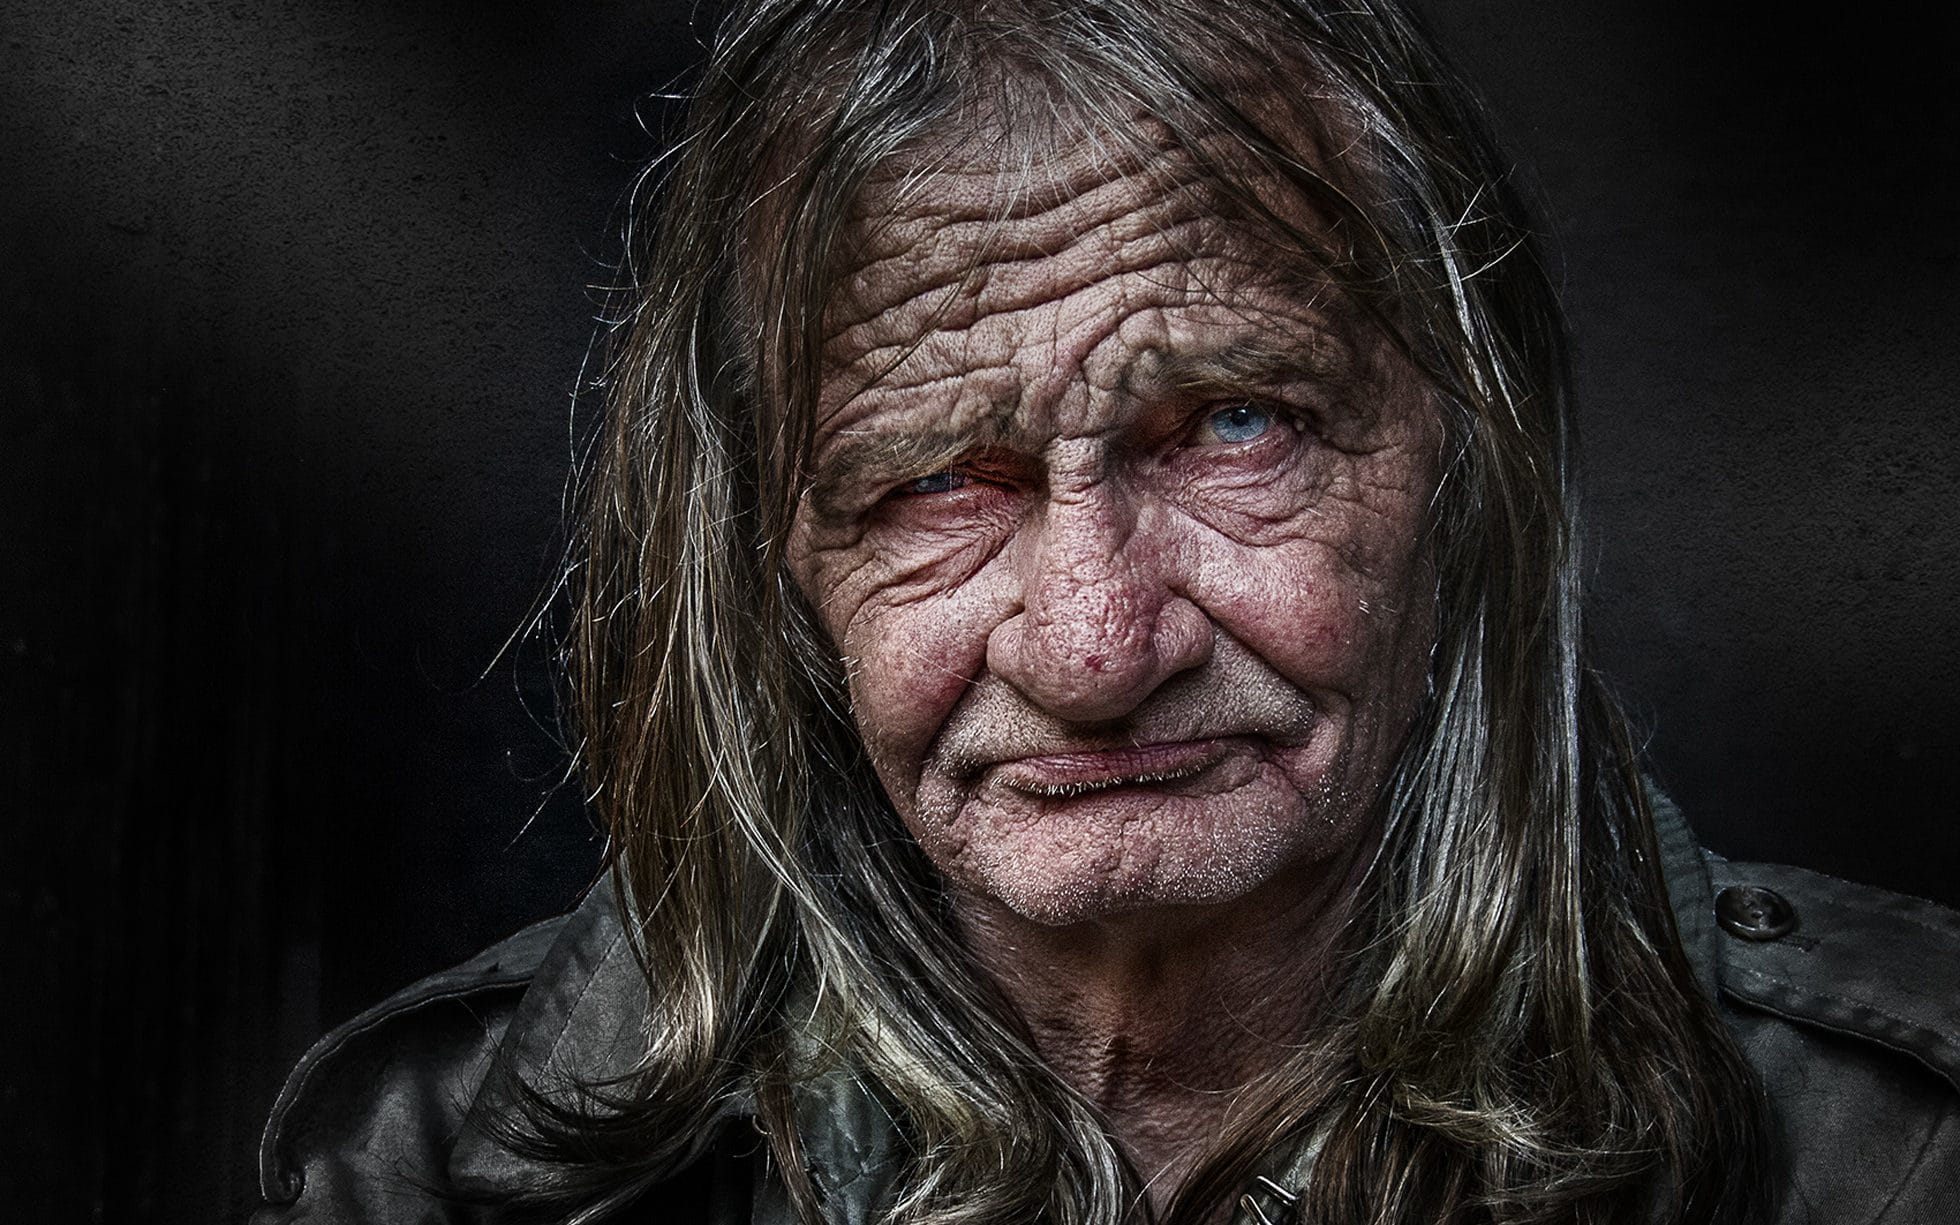 Portraits of homeless people by photographer Shine Gonzalvez - News